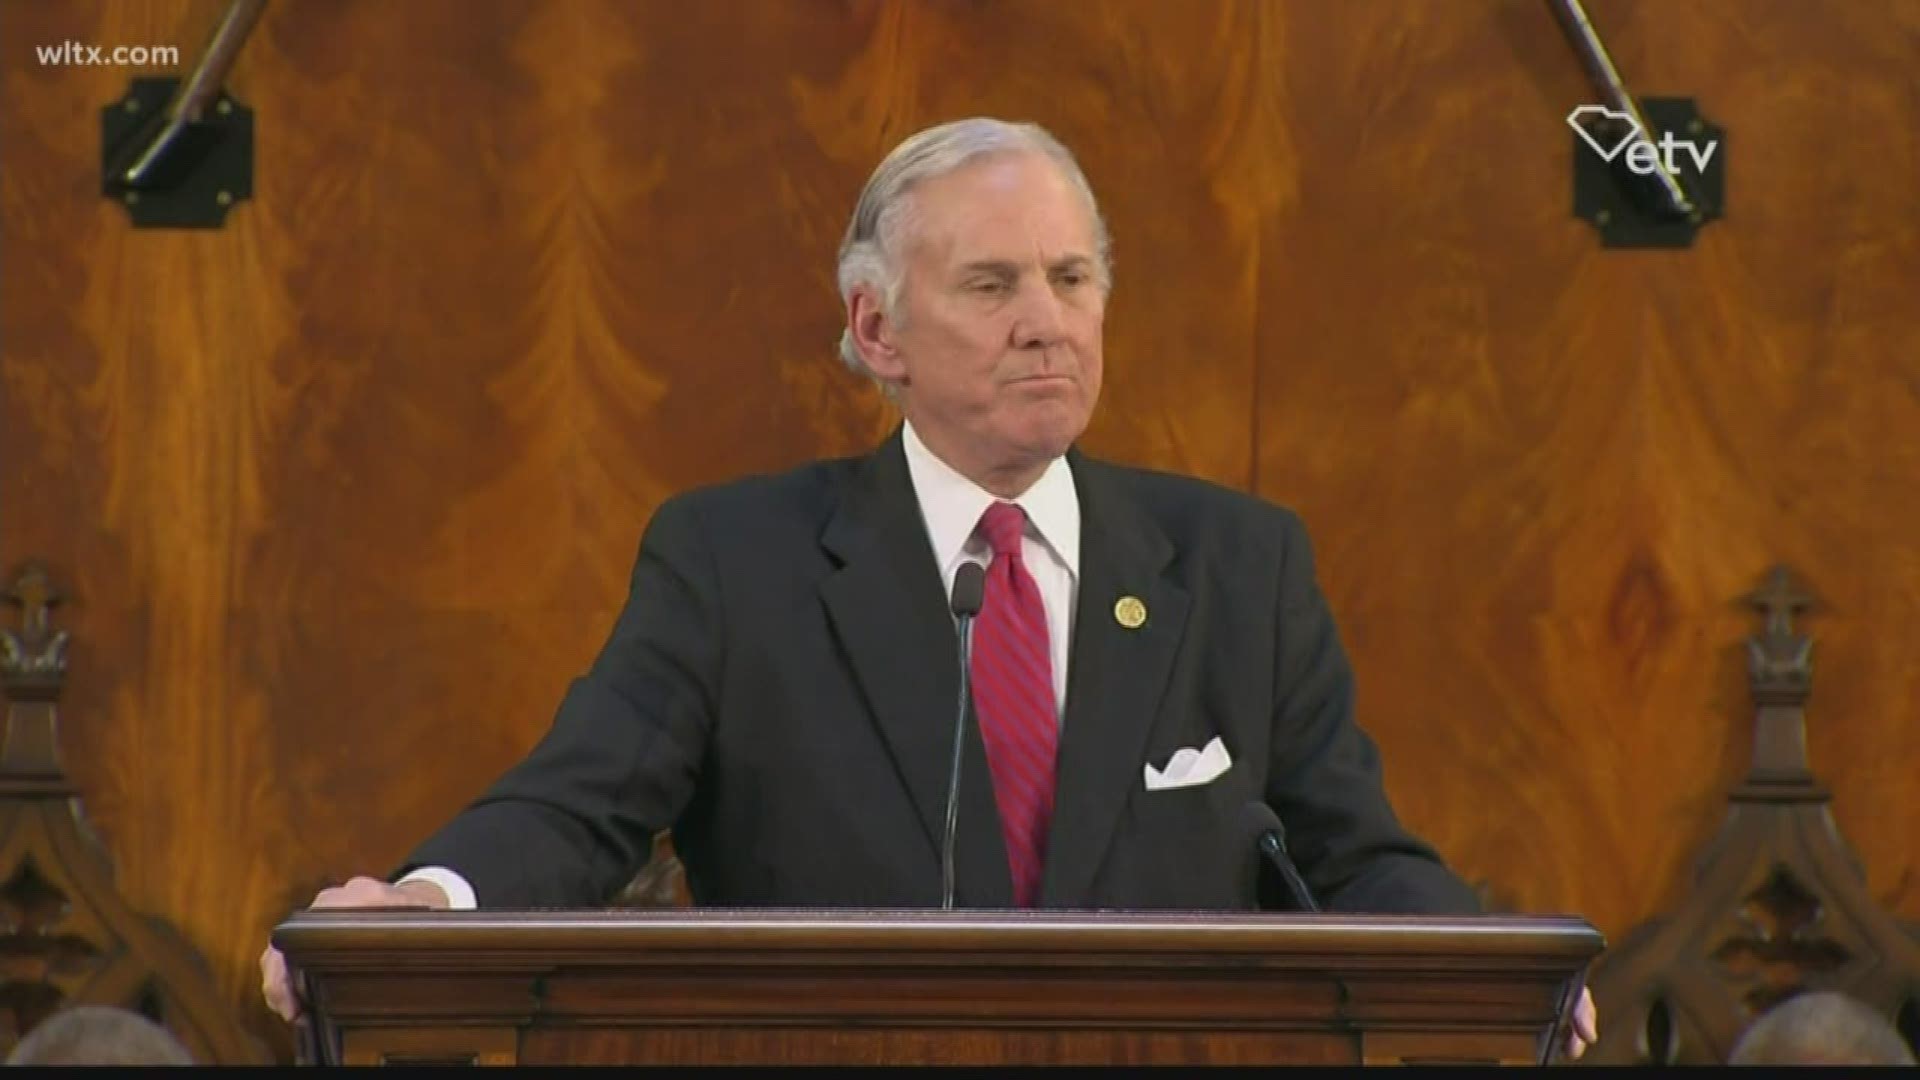 There were mixed reactions from lawmakers following the Governor's State of the State address.